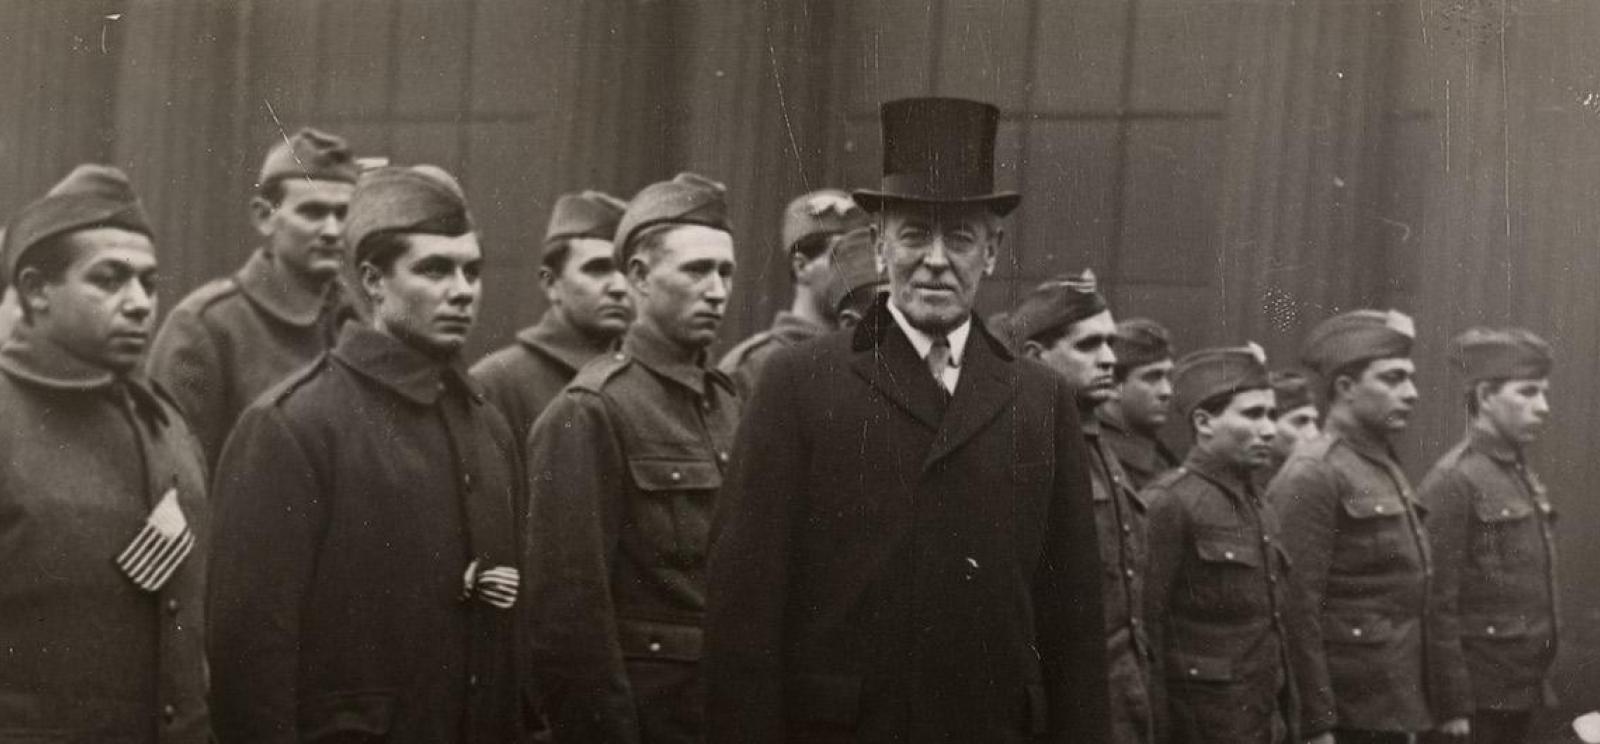 Black and white photo of Woodrow Wilson in a top hat standing in front of a line of soldiers in military uniform.